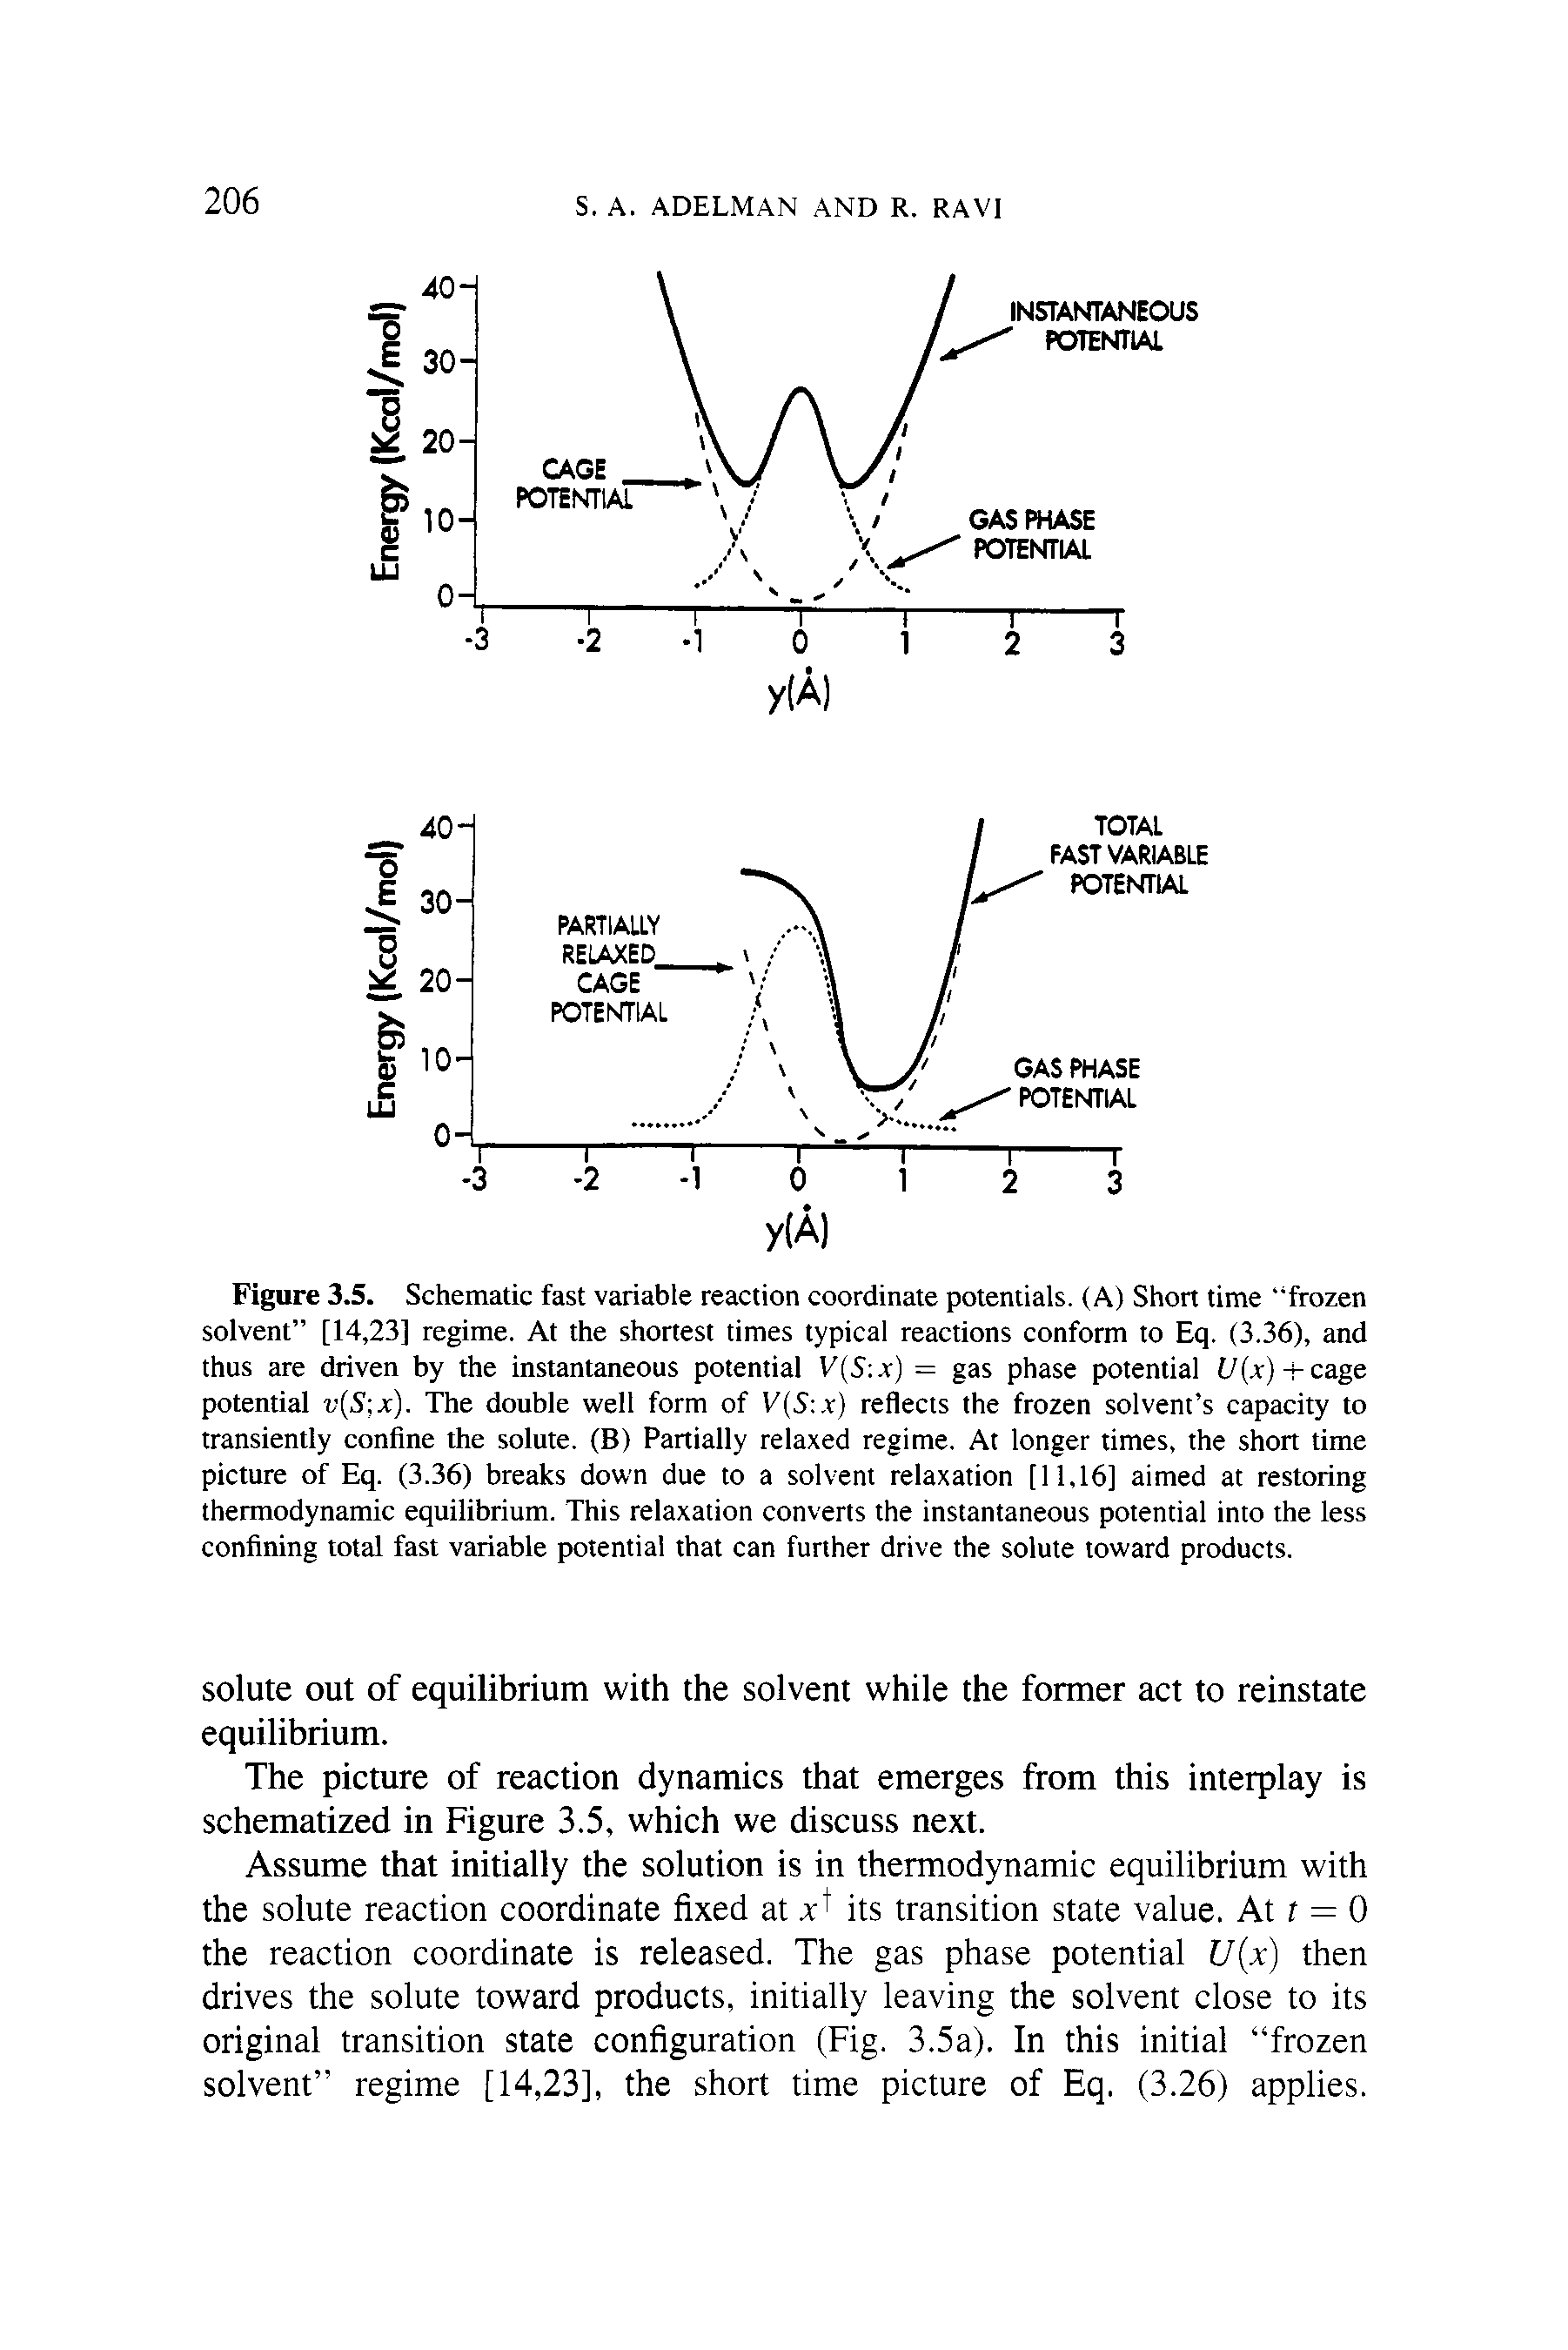 Figure 3.5. Schematic fast variable reaction coordinate potentials. (A) Short time frozen solvent [14,23] regime. At the shortest times typical reactions conform to Eq. (3.36), and thus are driven by the instantaneous potential V(S x) = gas phase potential t/(x) + cage potential v S-,x). The double well form of F(S .v) reflects the frozen solvent s capacity to transiently confine the solute. (B) Partially relaxed regime. At longer times, the short time picture of Eq. (3.36) breaks down due to a solvent relaxation [11,16] aimed at restoring thermodynamic equilibrium. This relaxation converts the instantaneous potential into the less confining total fast variable potential that can further drive the solute toward products.